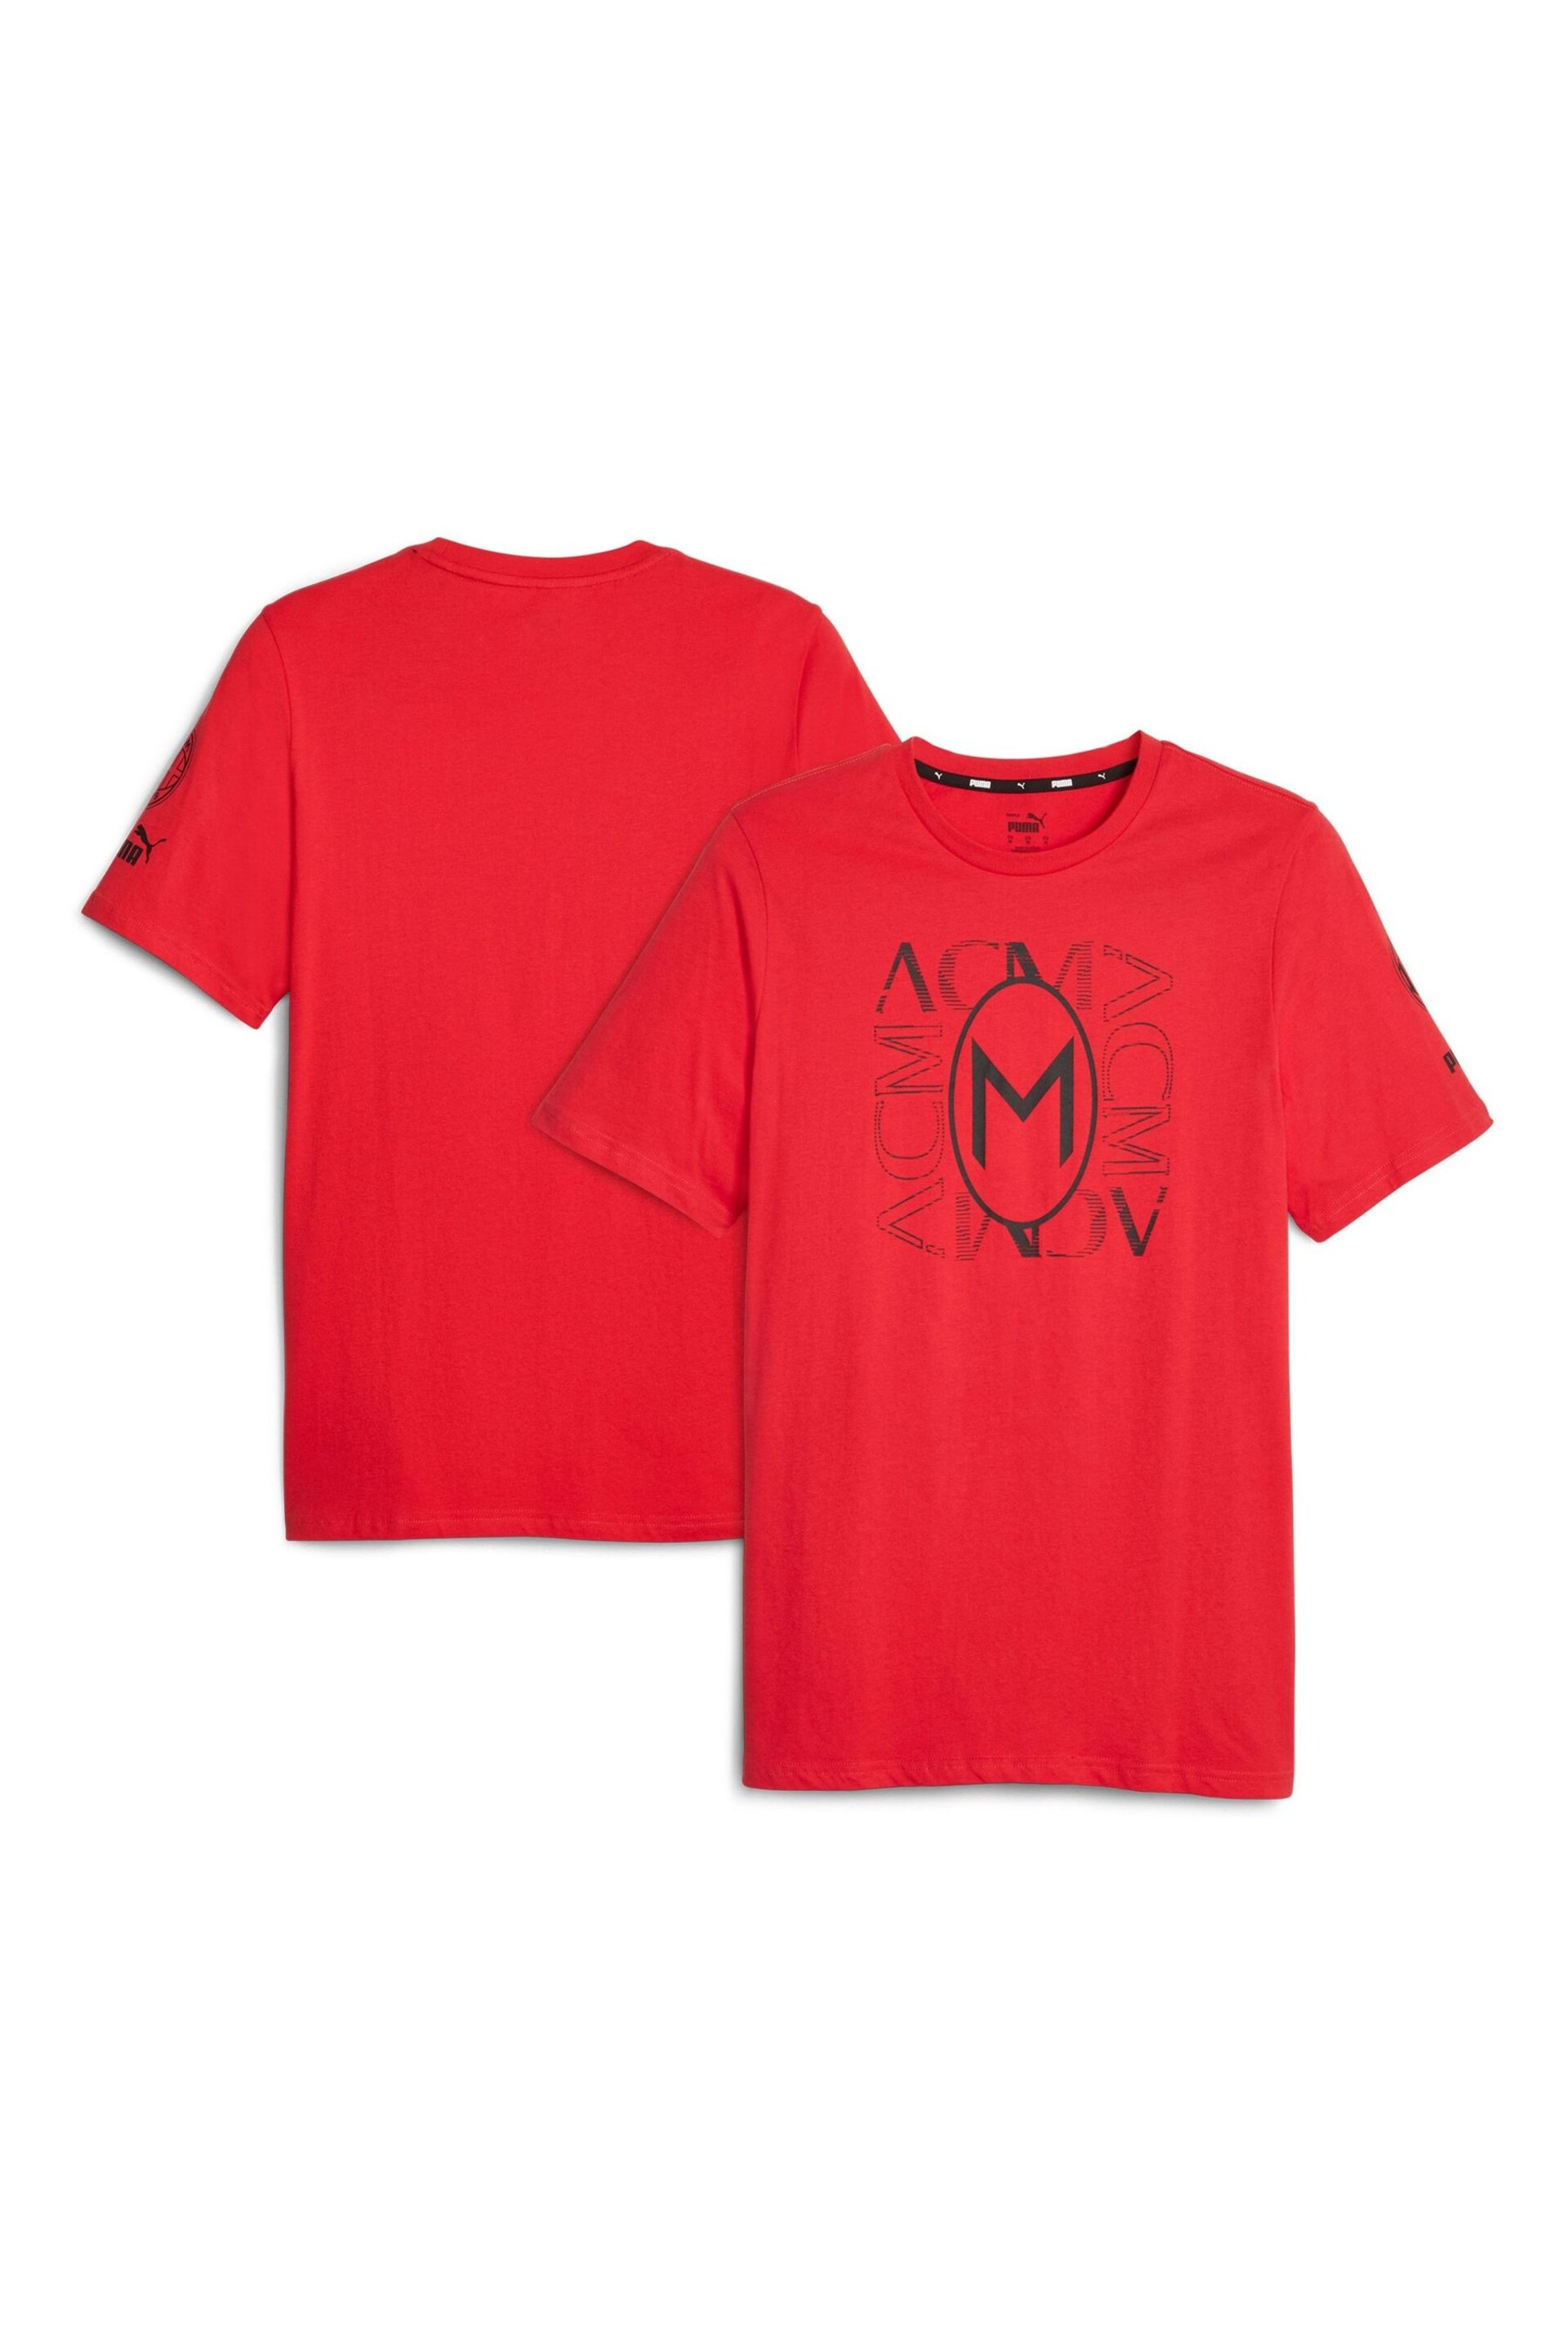 Puma Red AC Milan FtblCore Graphic T-Shirt - Image 1 of 3